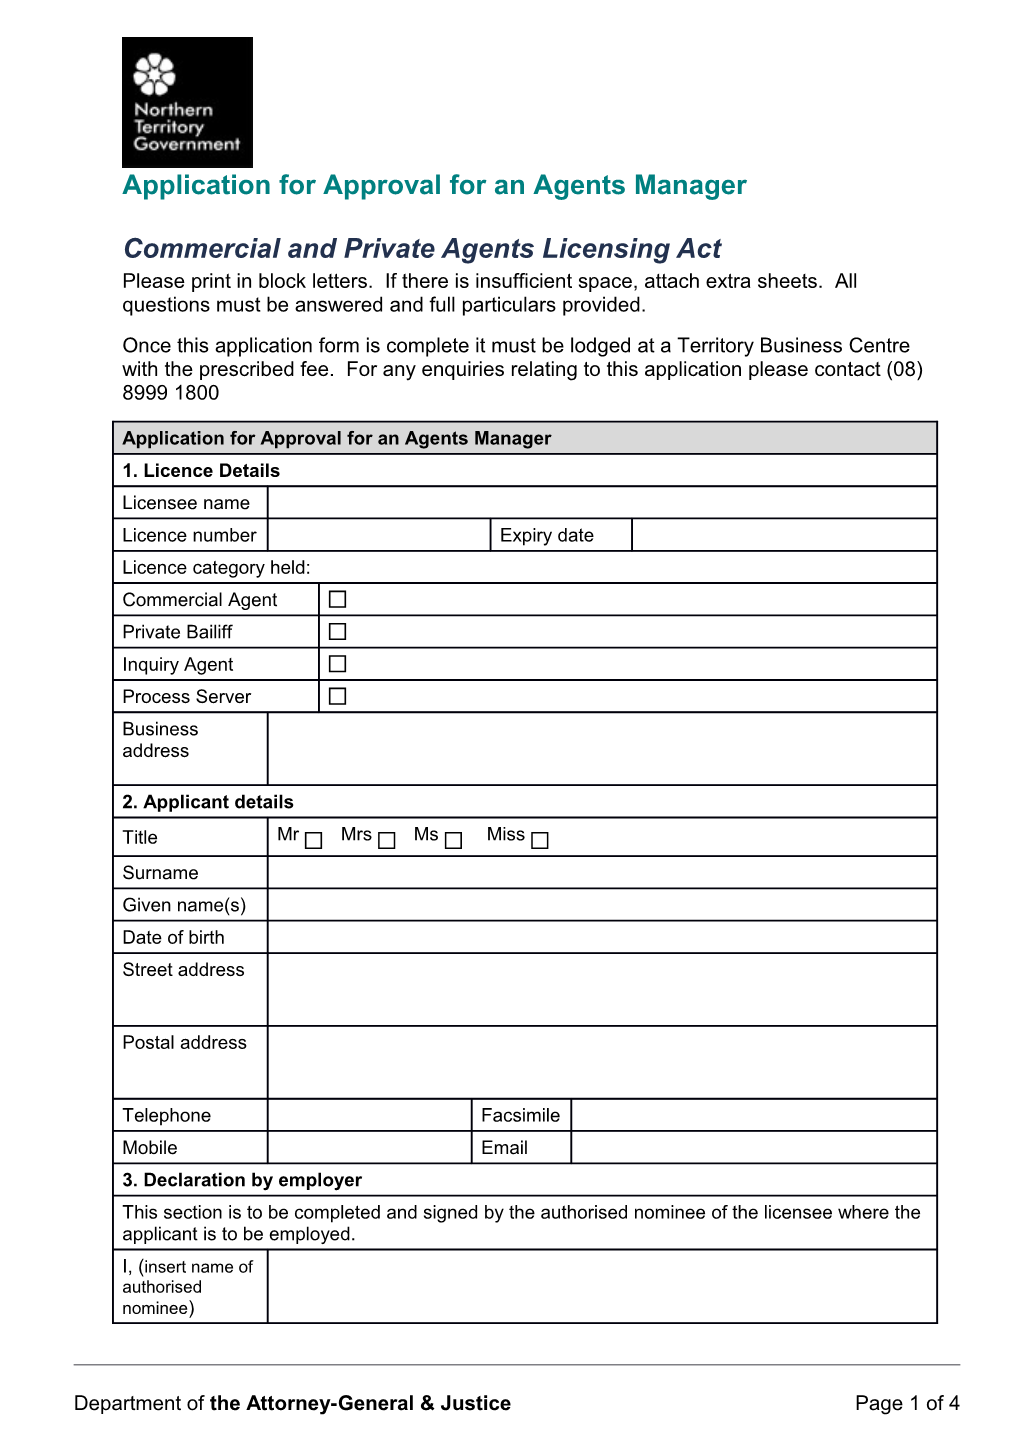 04 Application for Approval for an Agents Manager